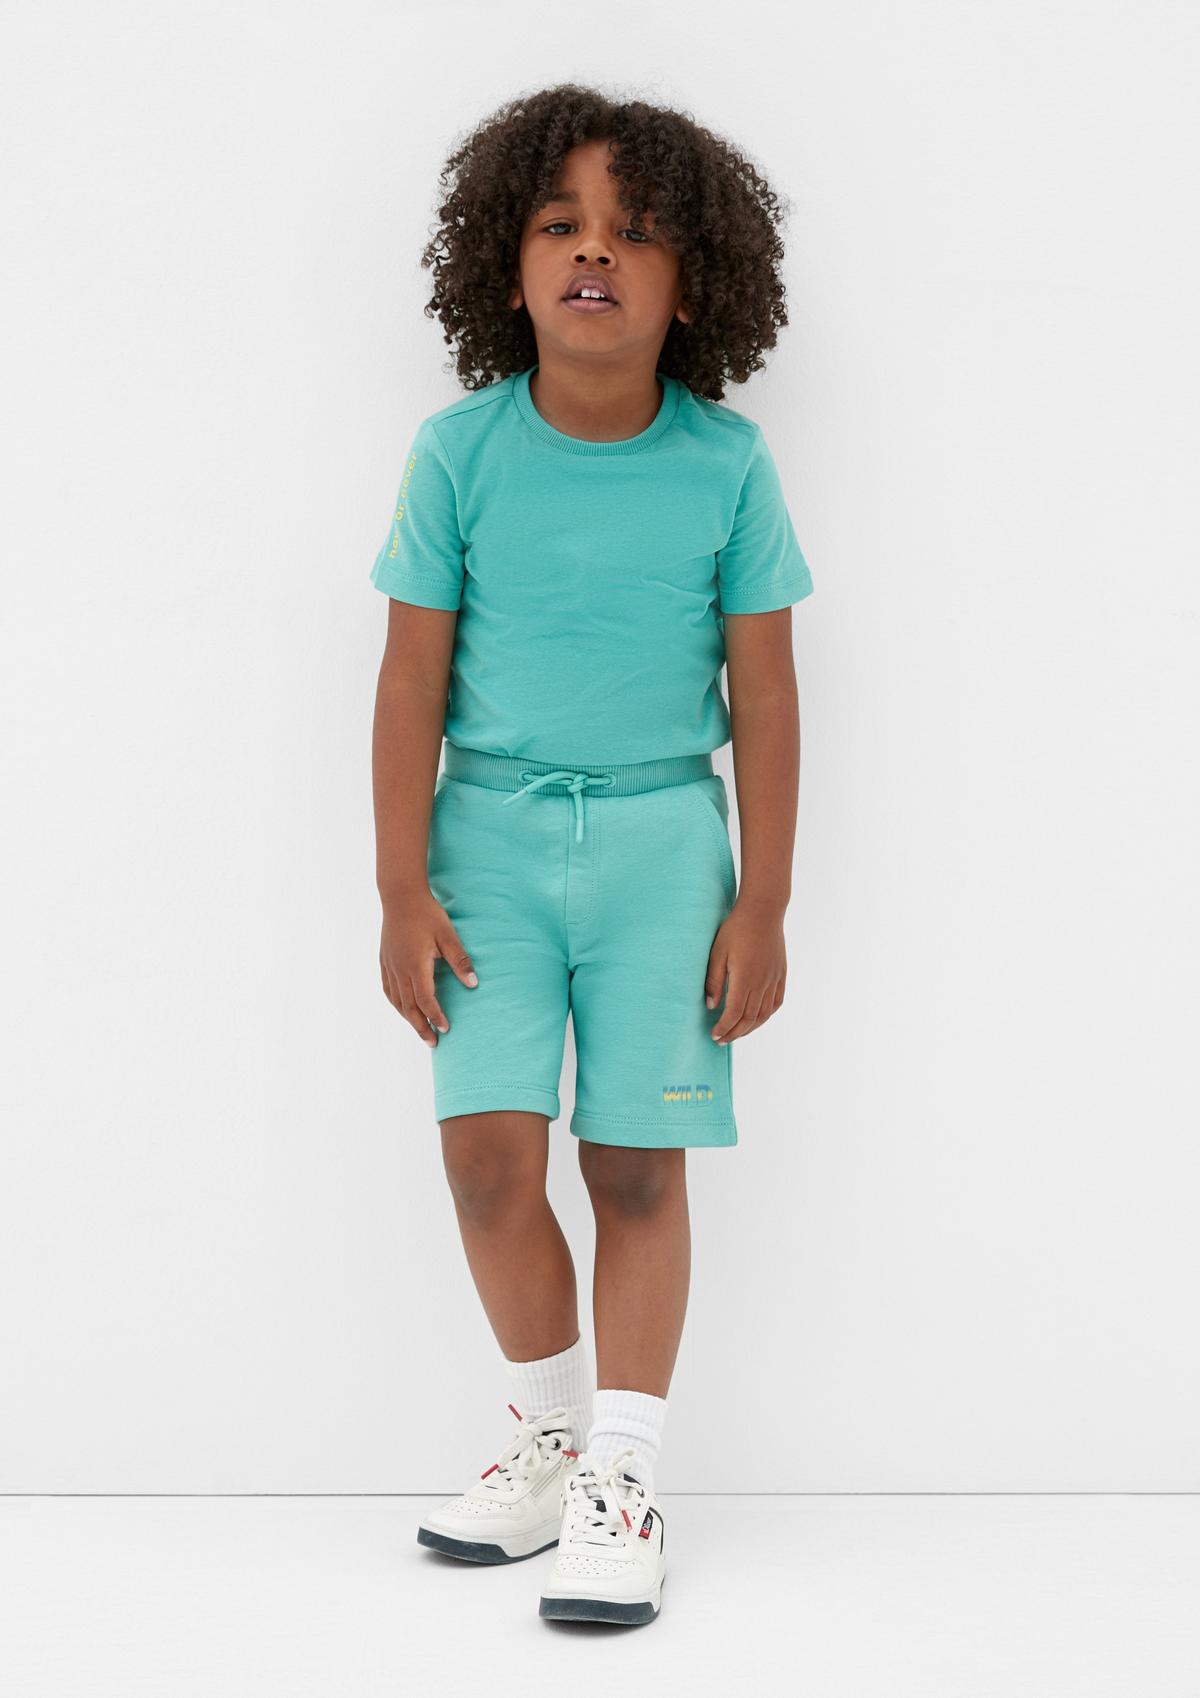 Bermuda teens shorts and boys online for Find